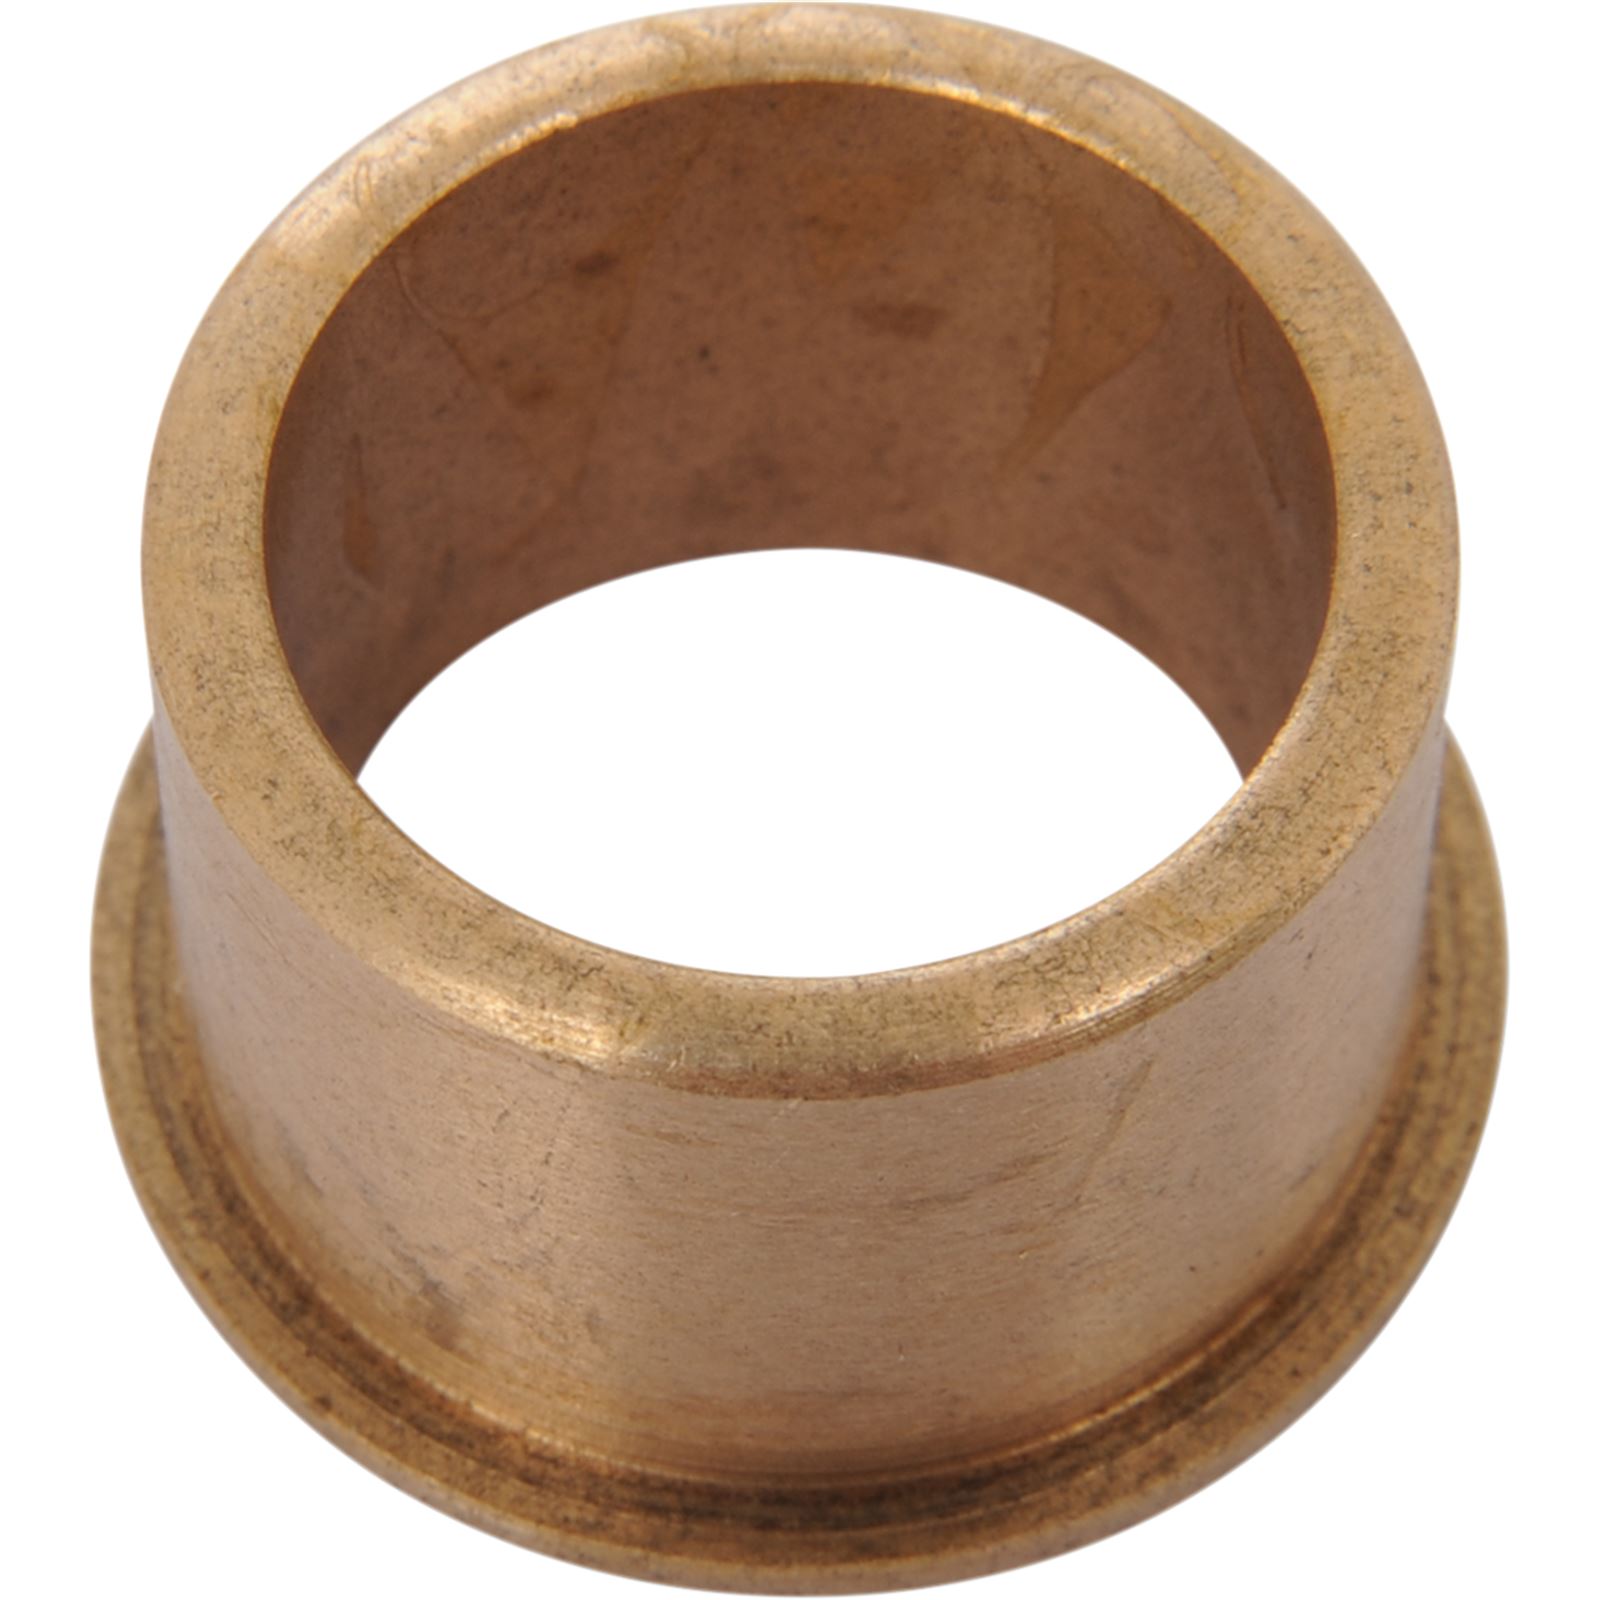 Eastern Motorcycle Parts Cam Cover Bushing